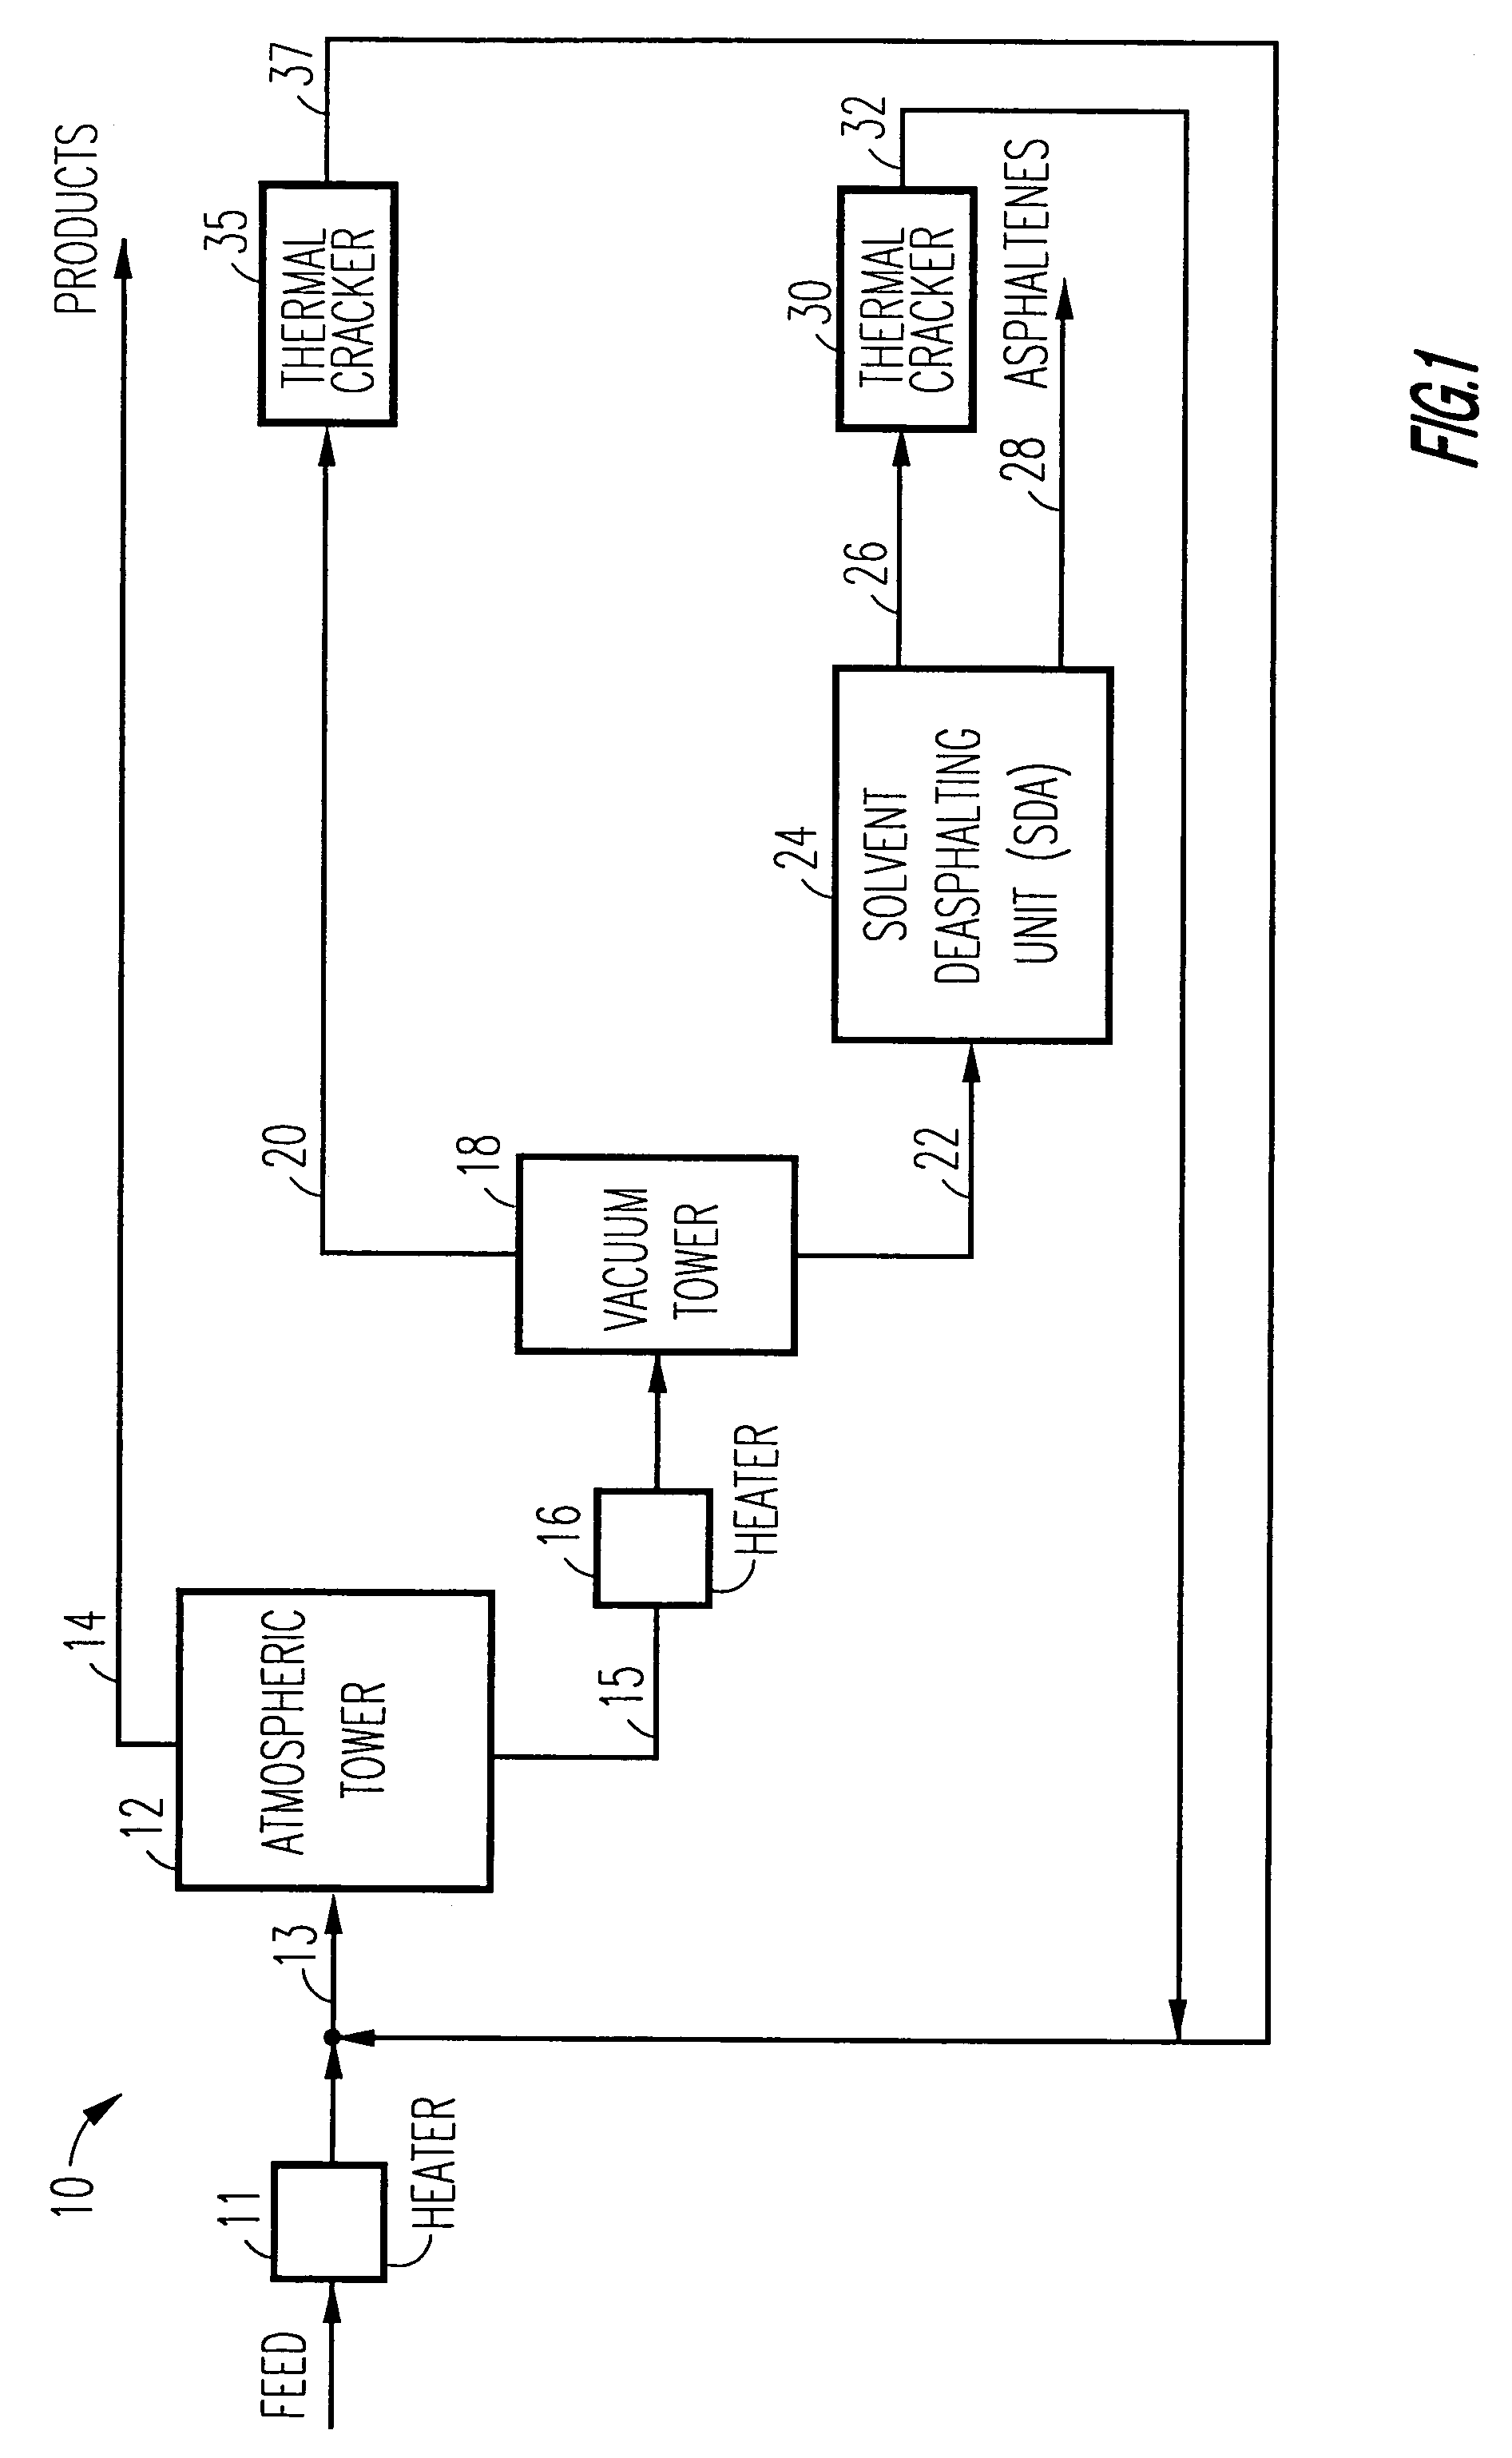 Method of and apparatus for processing heavy hydrocarbon feeds